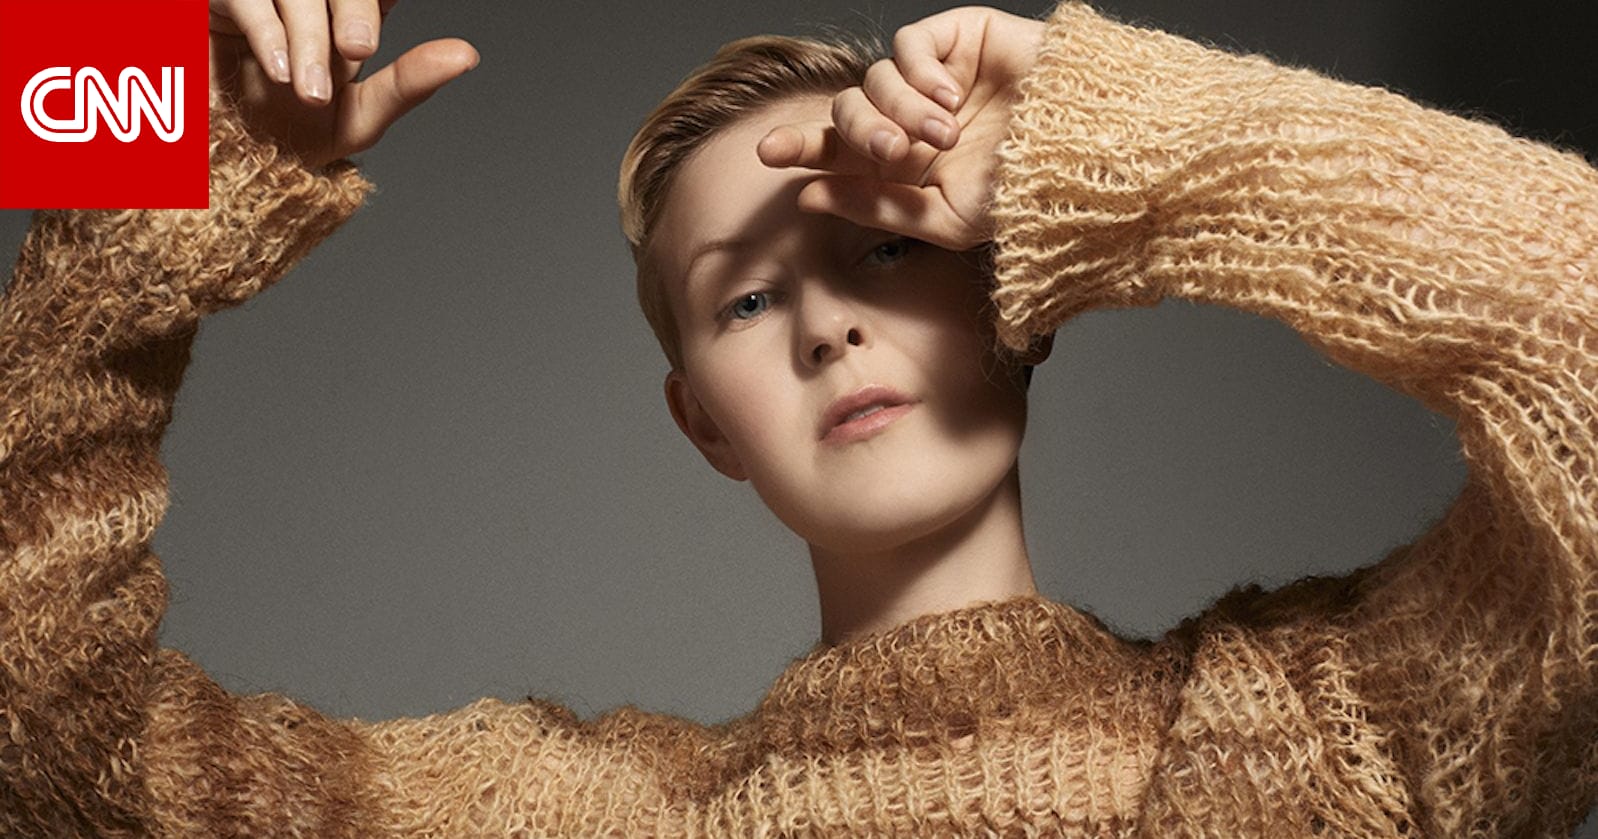 A shirt woven from human hair.. Will this type of fabric revolutionize the fashion industry?